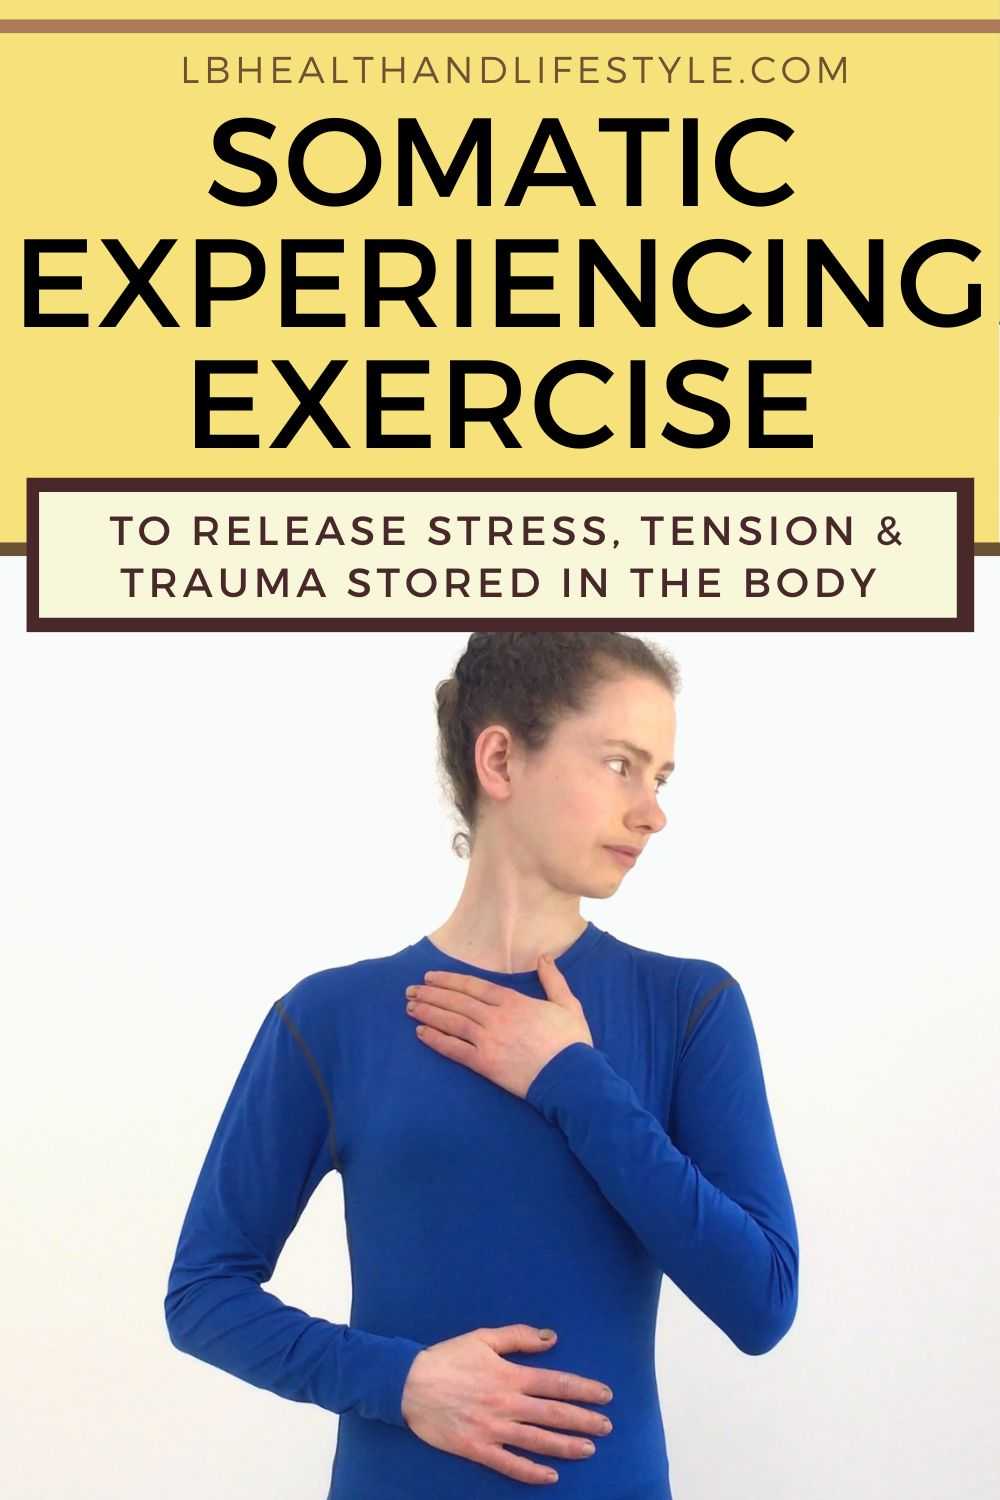 somatic experiencing exercise to release stress, tension & trauma stored in the body